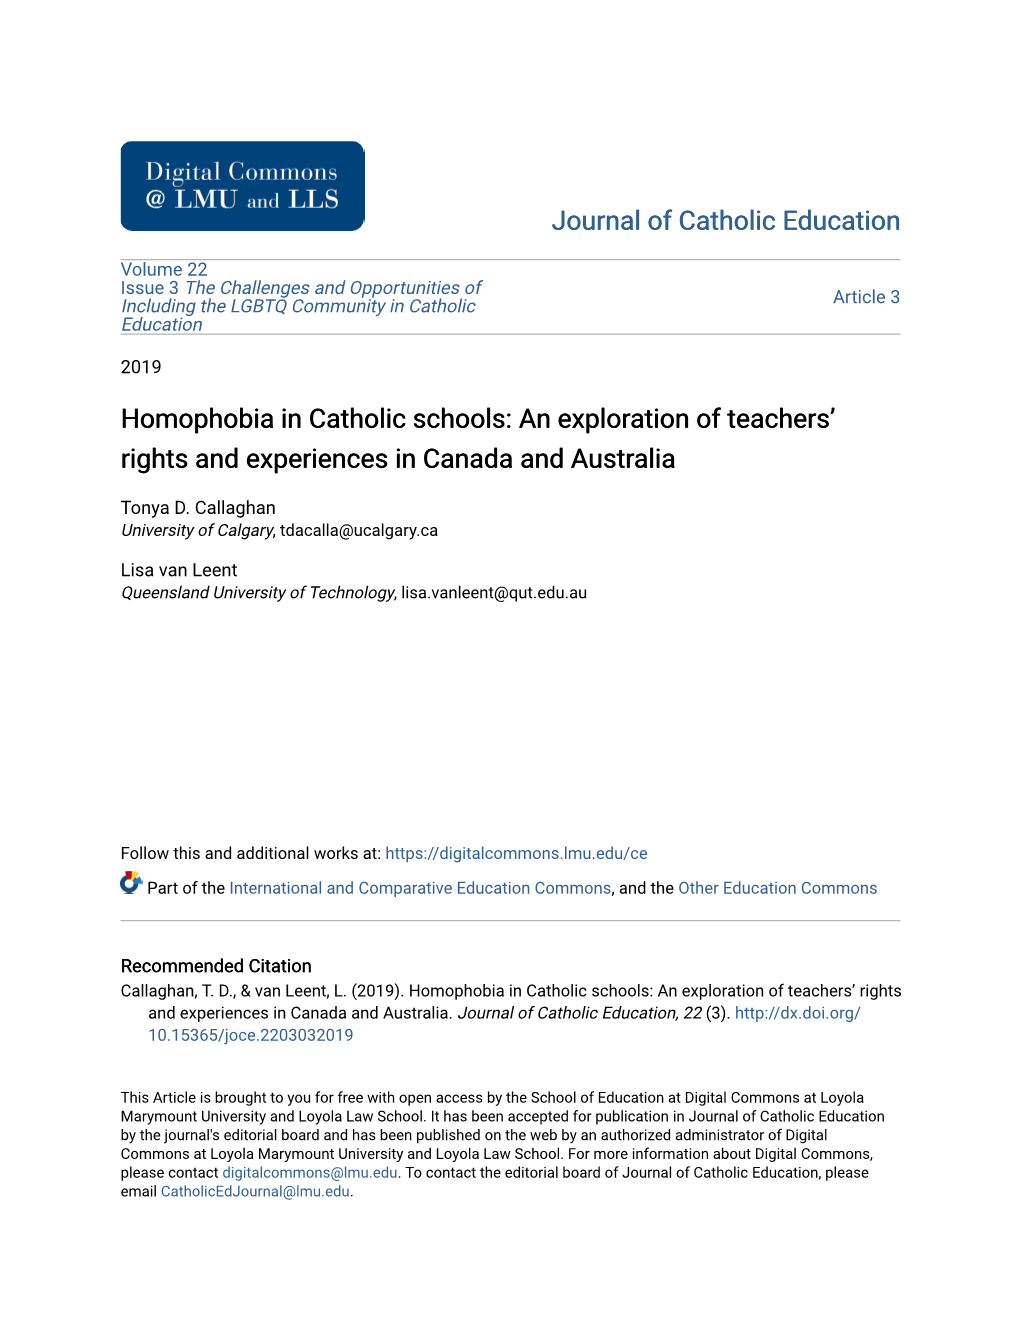 Homophobia in Catholic Schools: an Exploration of Teachers’ Rights and Experiences in Canada and Australia